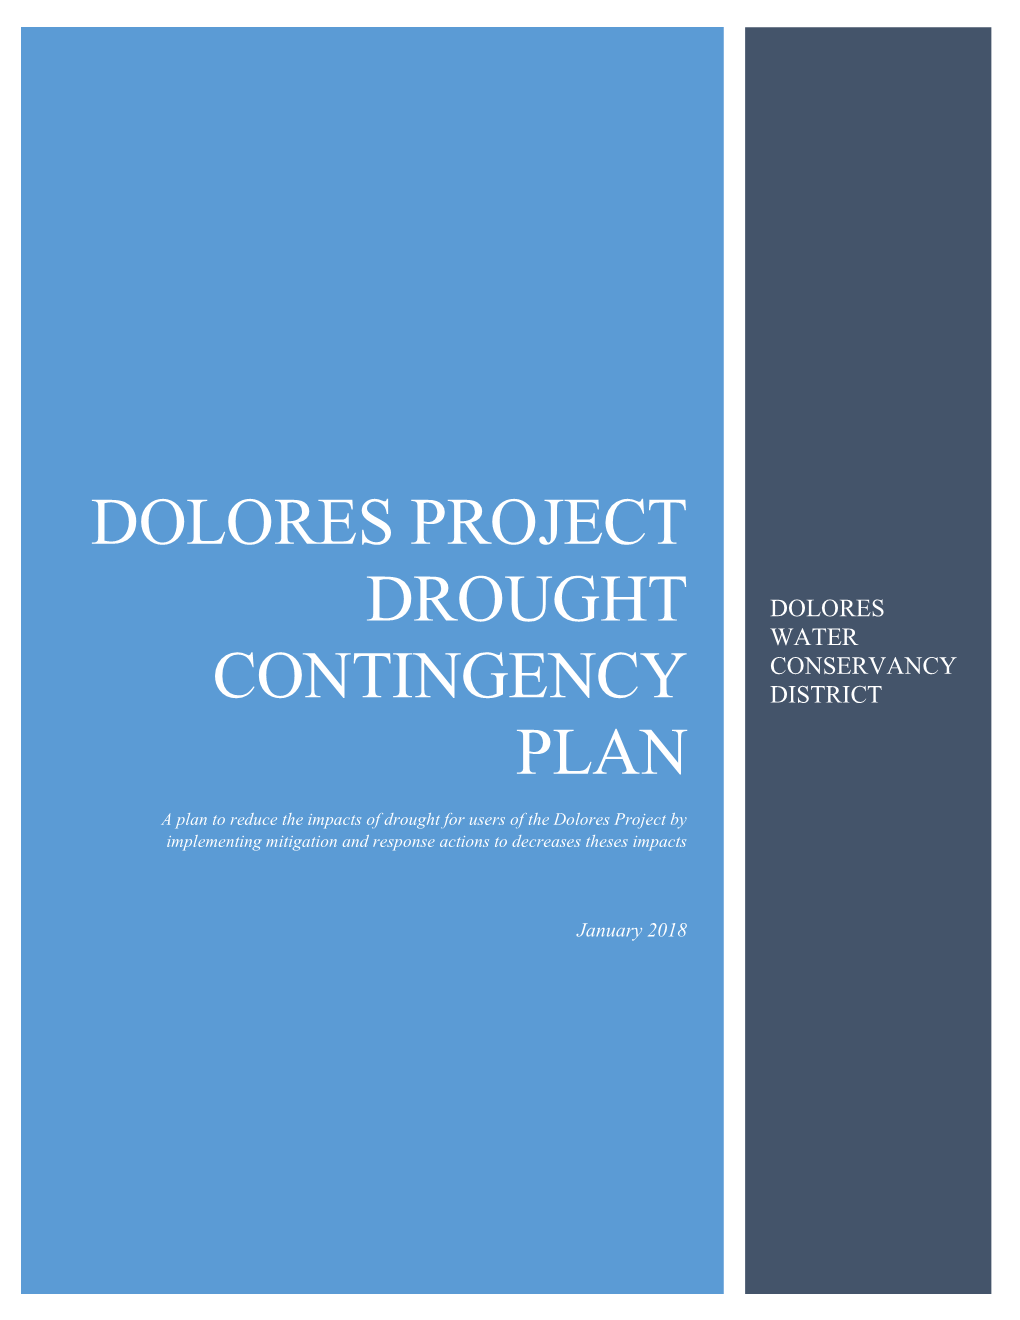 Dolores Project Drought Contingency Plan